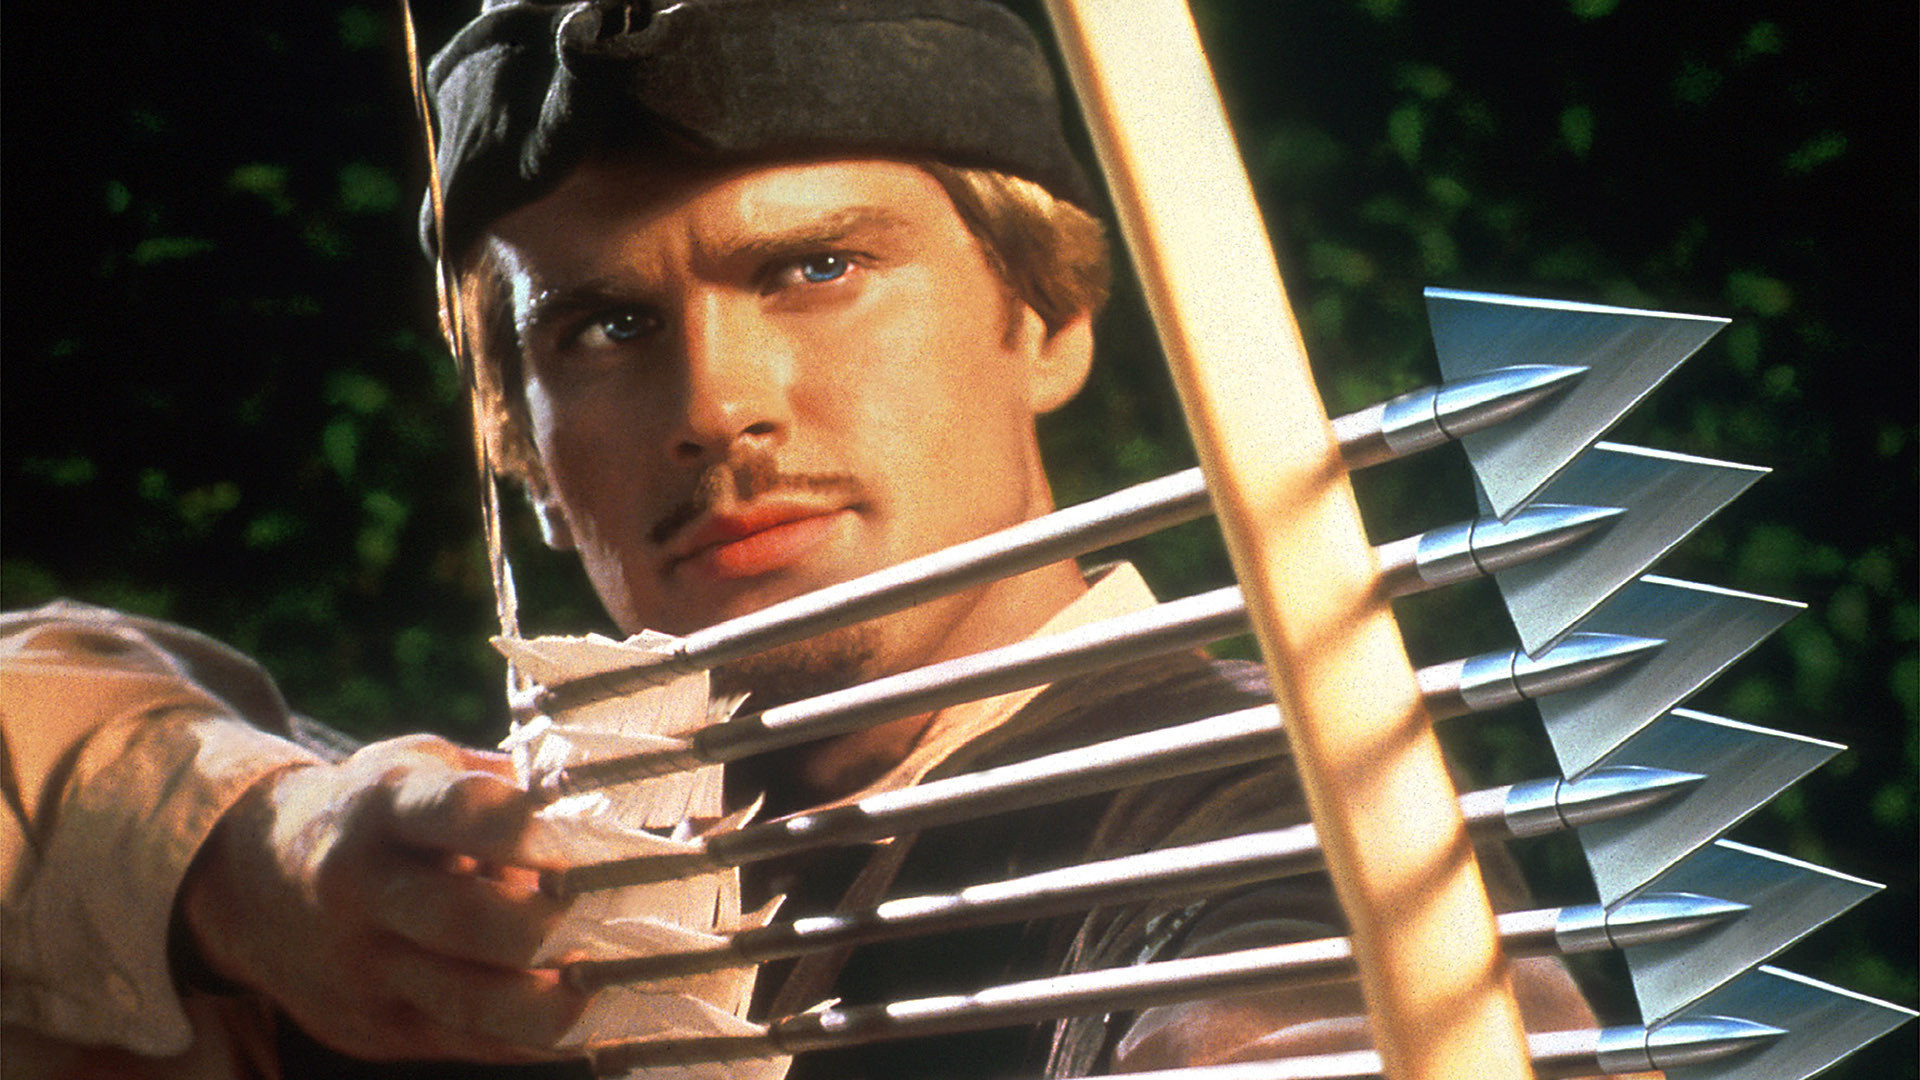 Just How Many Robin Hood Movies Do We Need? Apparently a Lot of Them